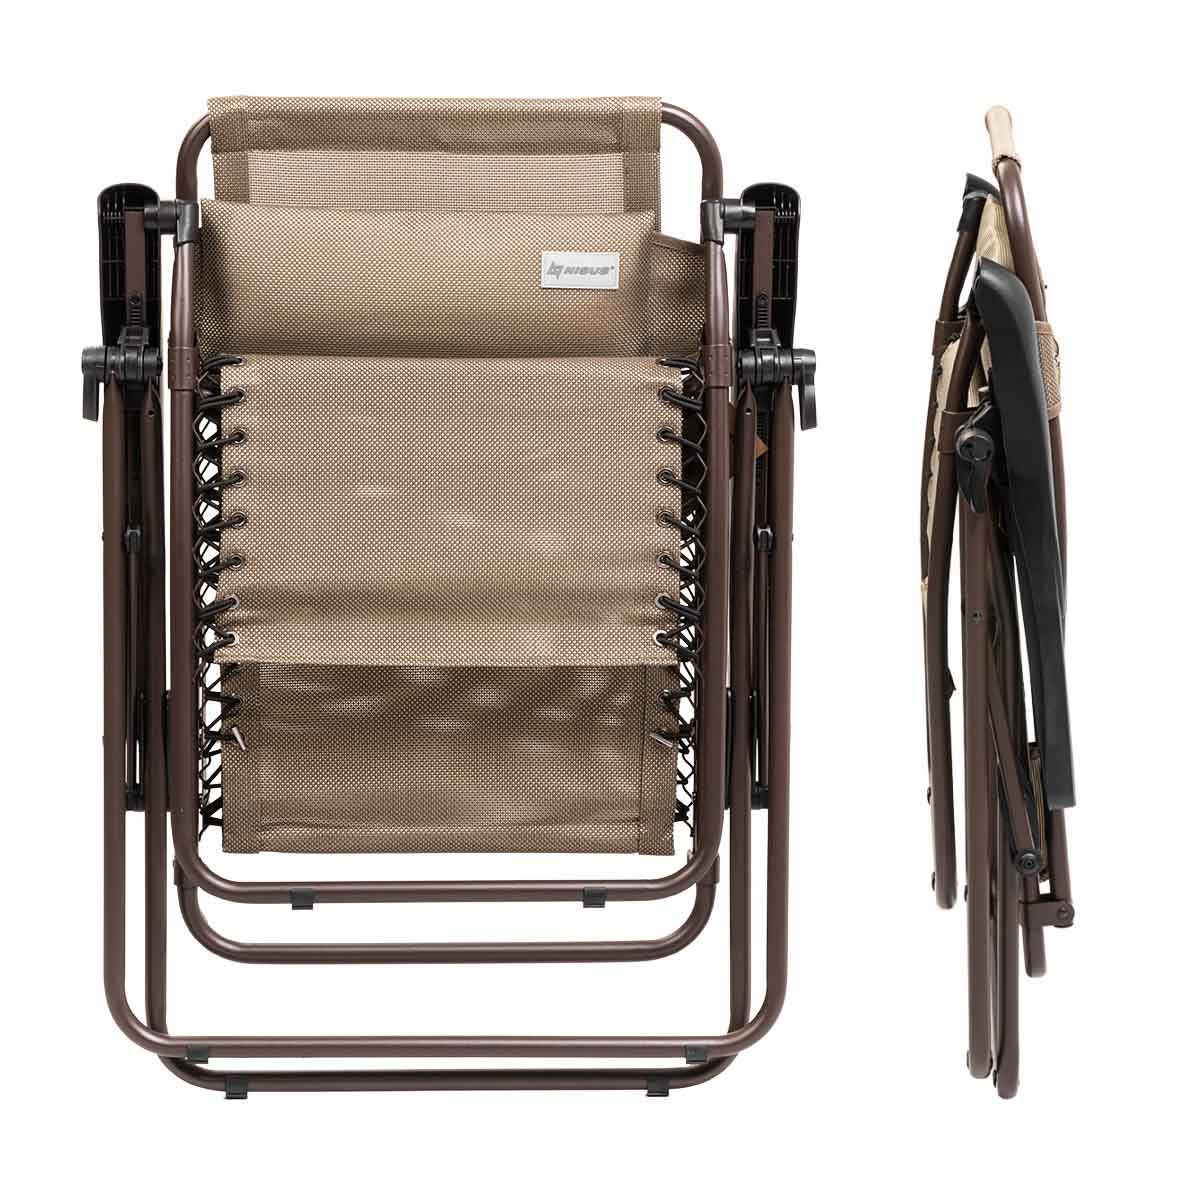 Zero Gravity Folding Patio Chair with Padded Pillow is foldable and could be easi;y carried